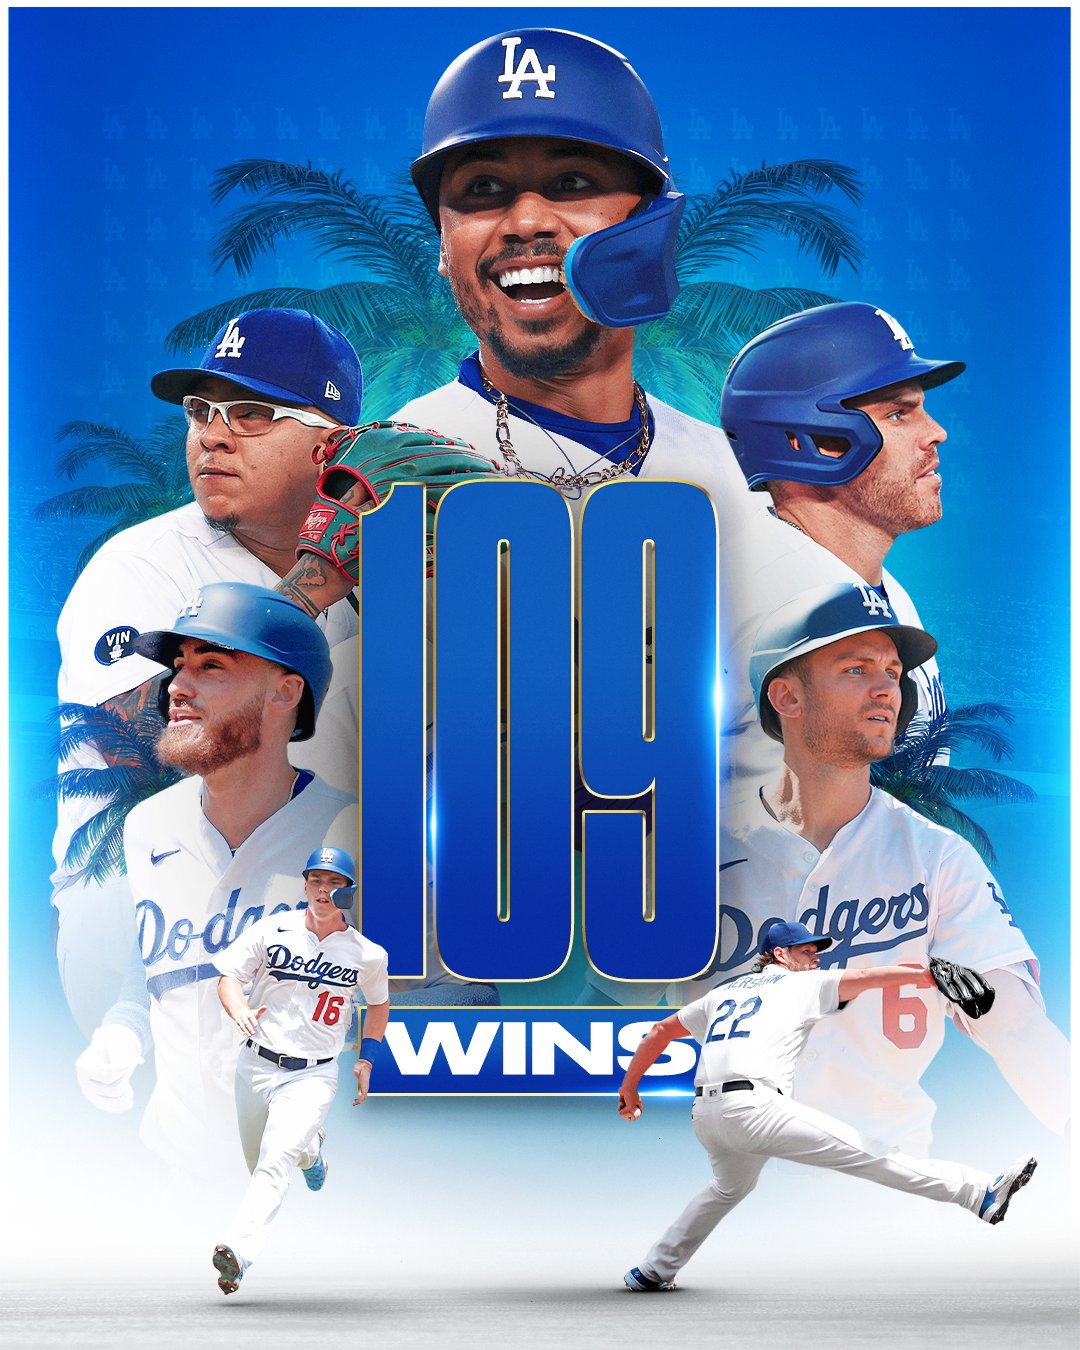 MLB on X: For the 9th time in 10 seasons, the @Dodgers are NL